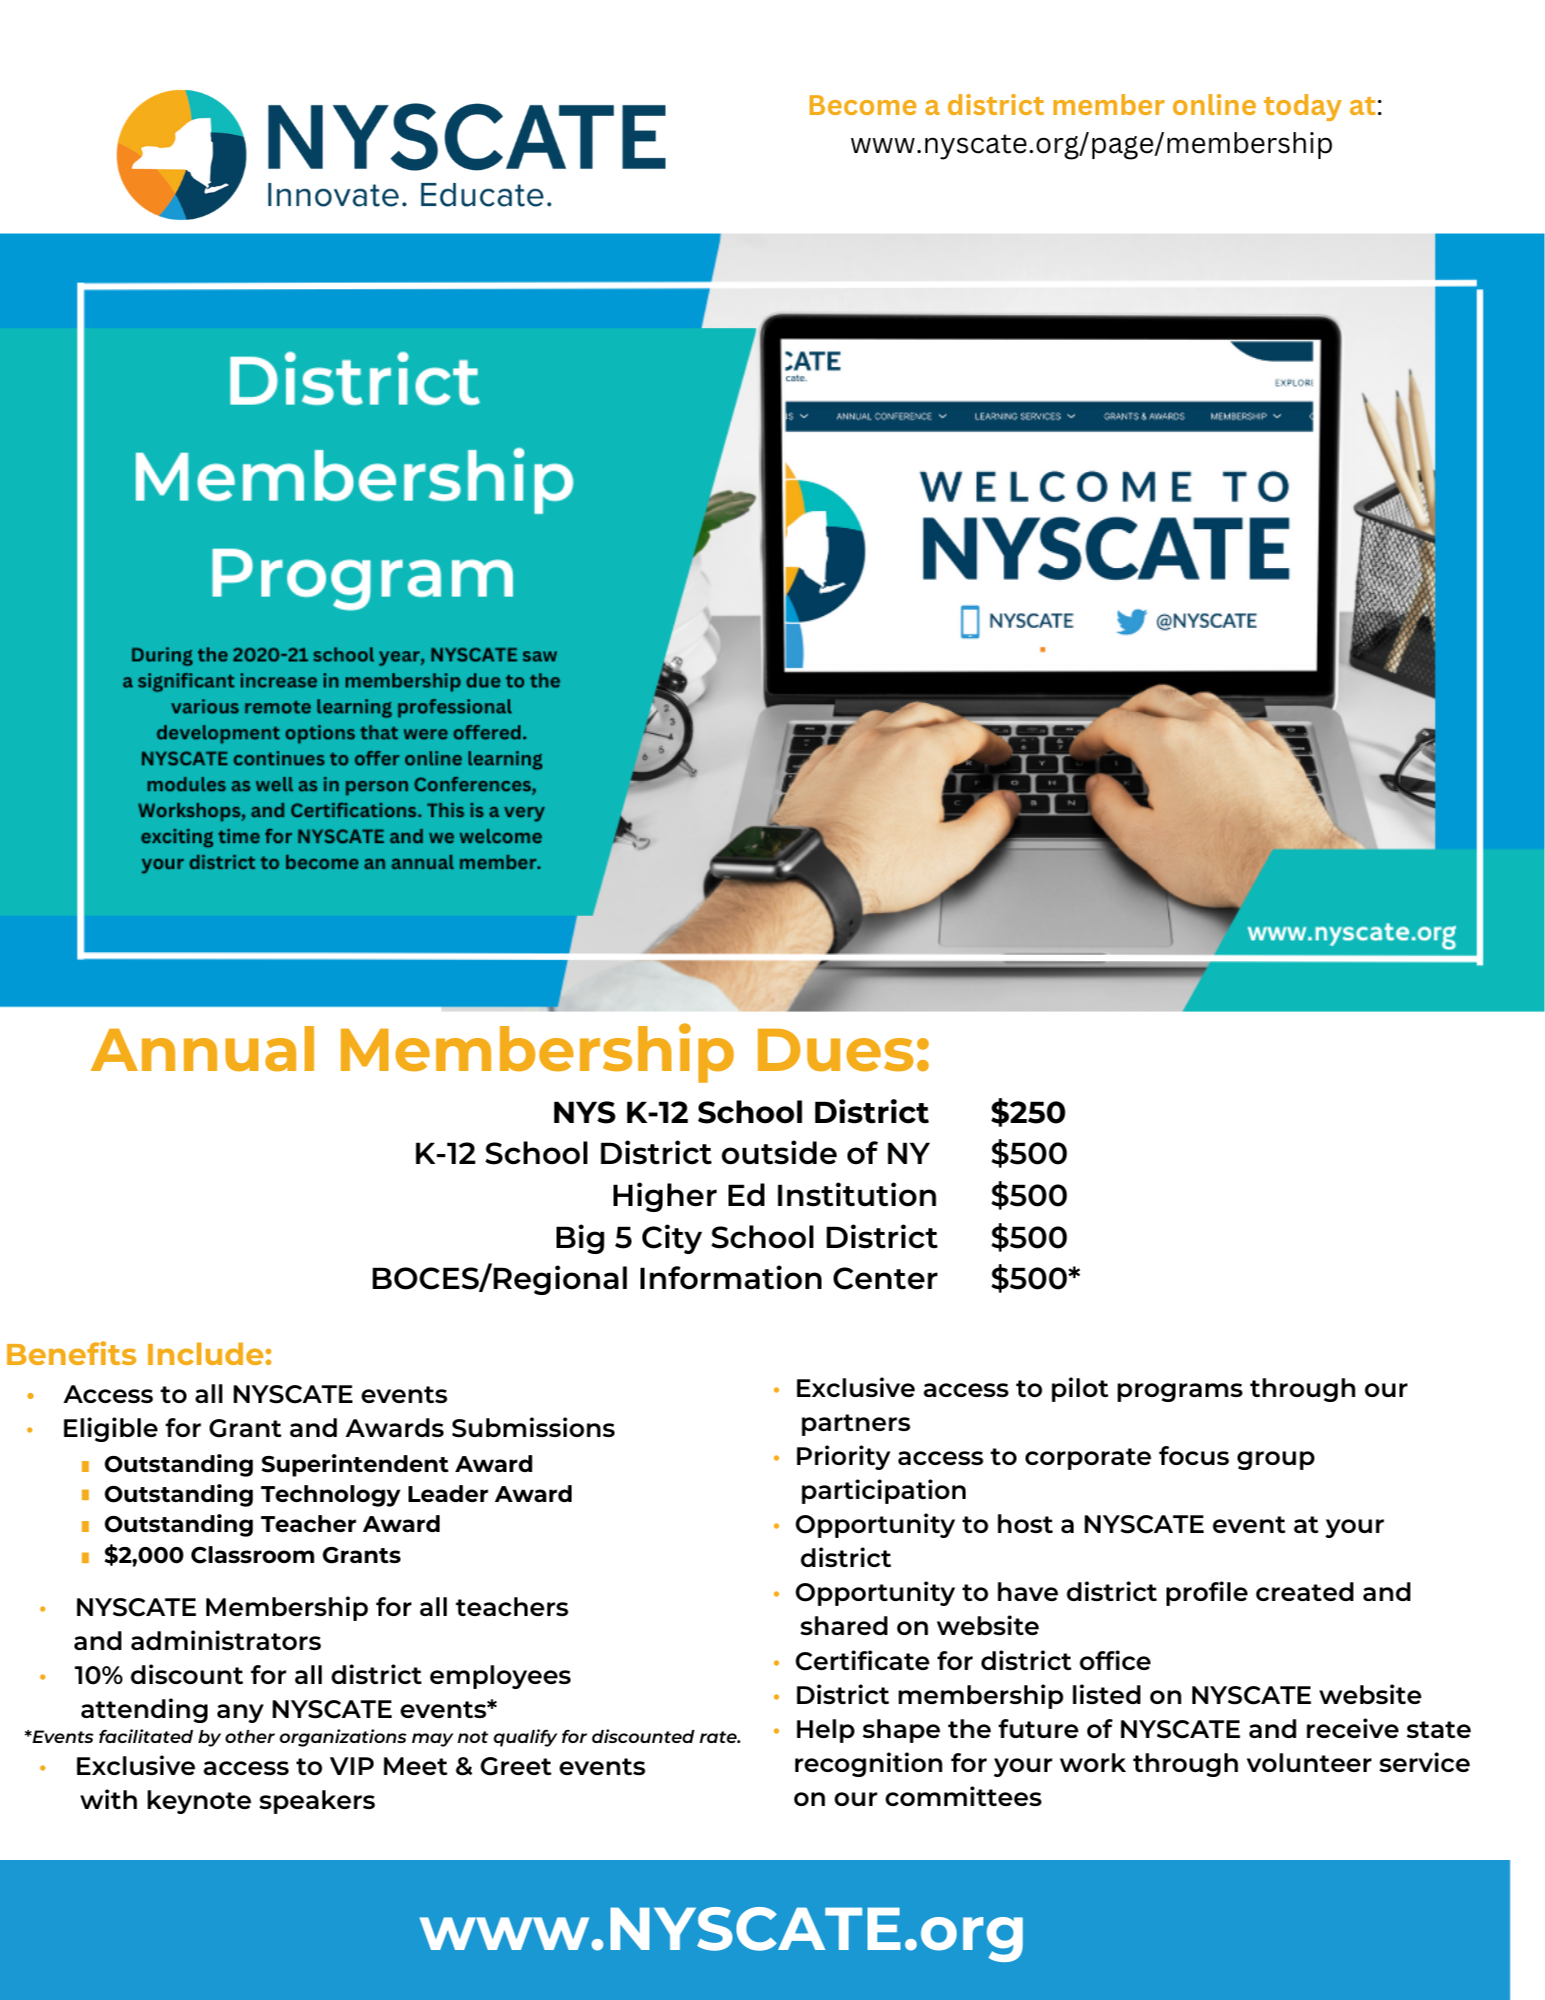 NYSCATE District Membership